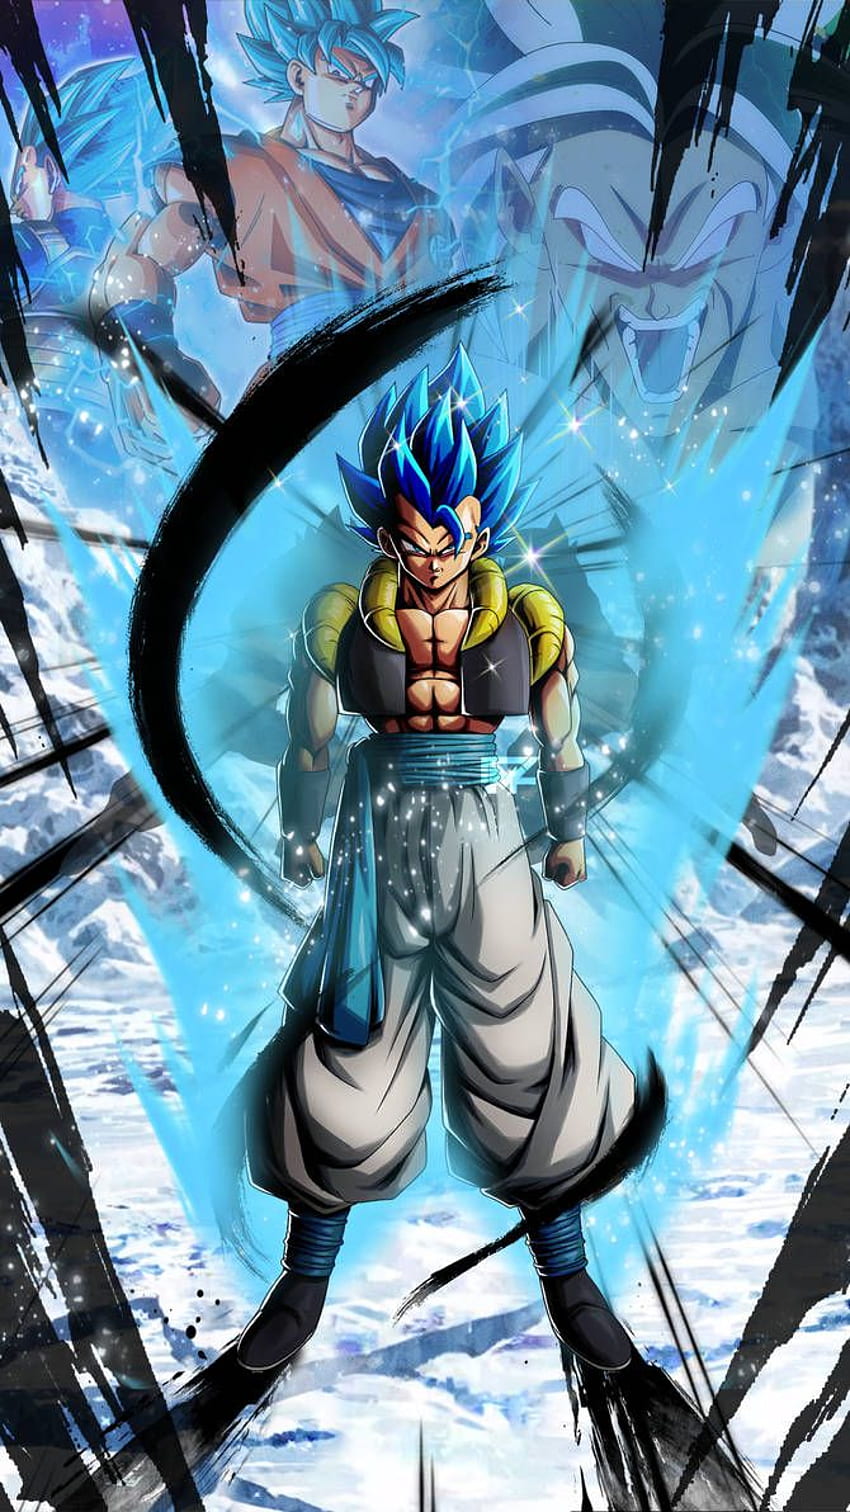 ⚡Zetta⚡ #EmLovers 💜🖤 on X: Gogeta and Vegito Blue Wallpaper Made by: Me  [Free To Use] (Likes ❤️ and RTs 🔁 appreciated) #DragonBallSuper  #VegitoBlue #GogetaBlue #DBLegends  / X